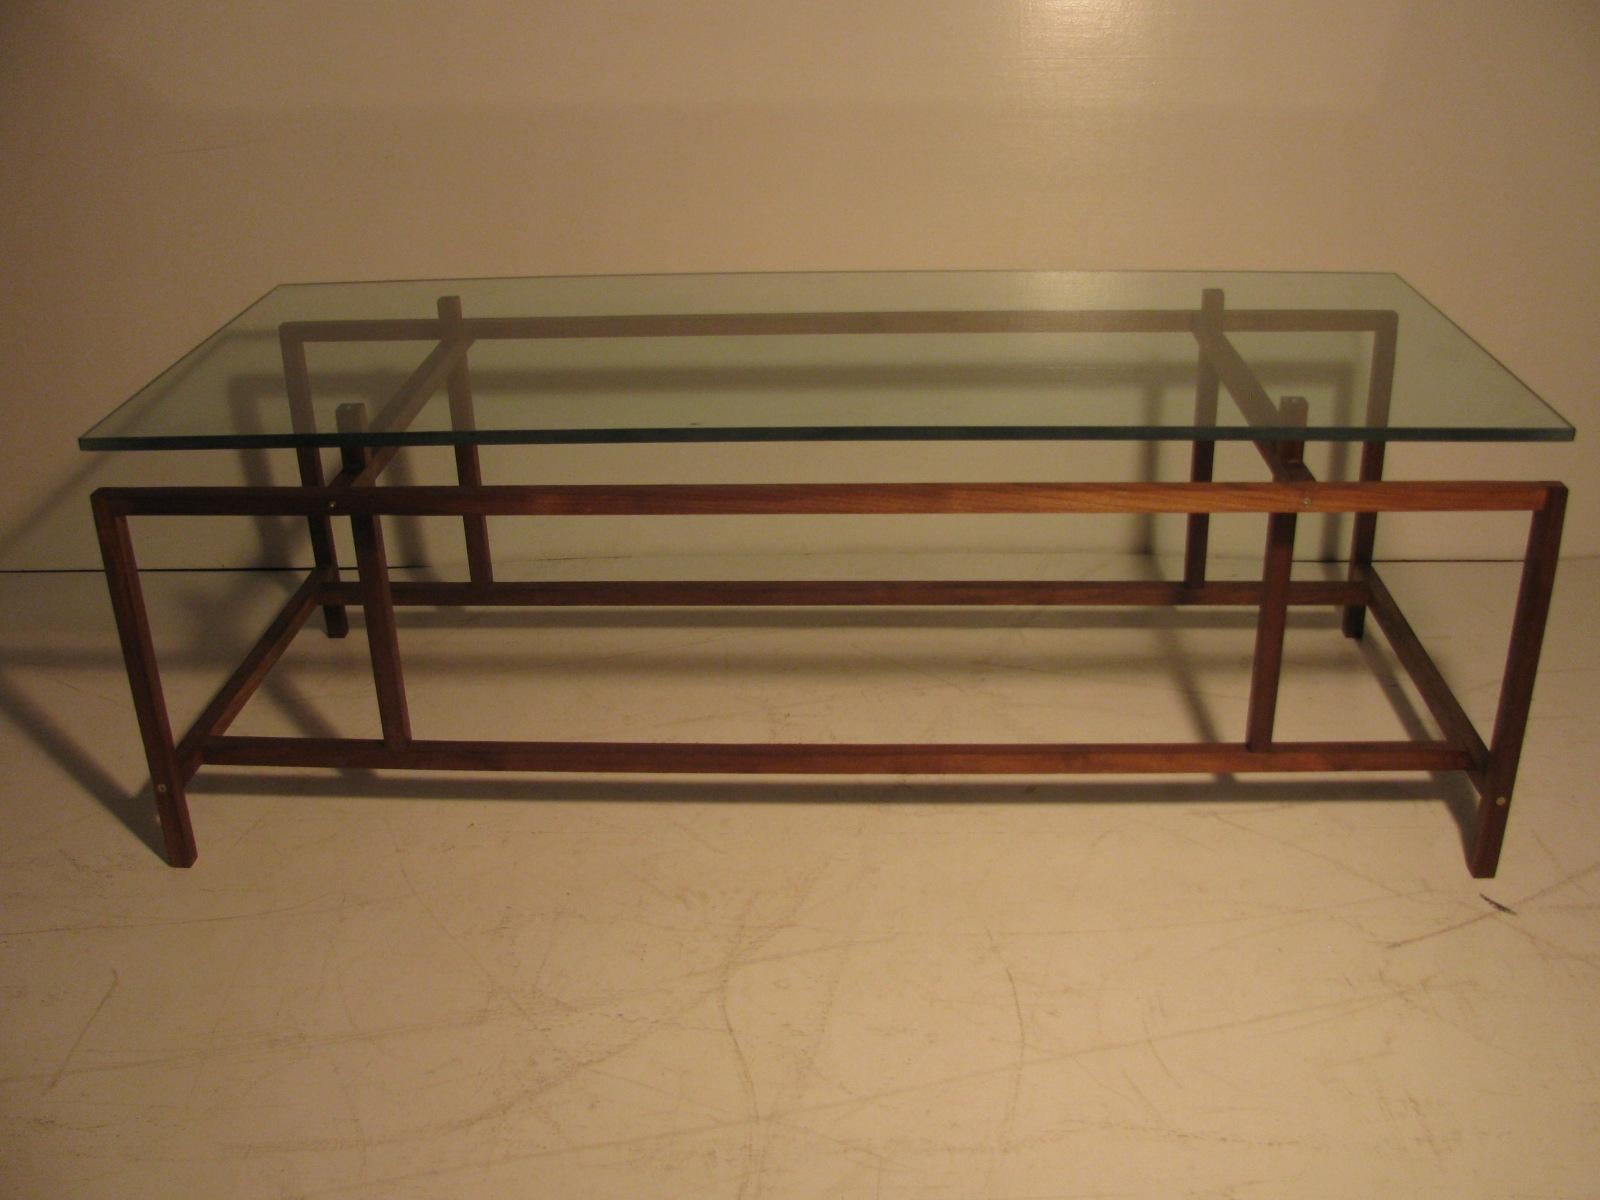 Beautiful with simple architectural lines which make up this elegant piece. Glass top fits snugly into pins which lock it into place, pins only go in halfway so glass remains smooth on the top. Table is well constructed and remains tight. Pair